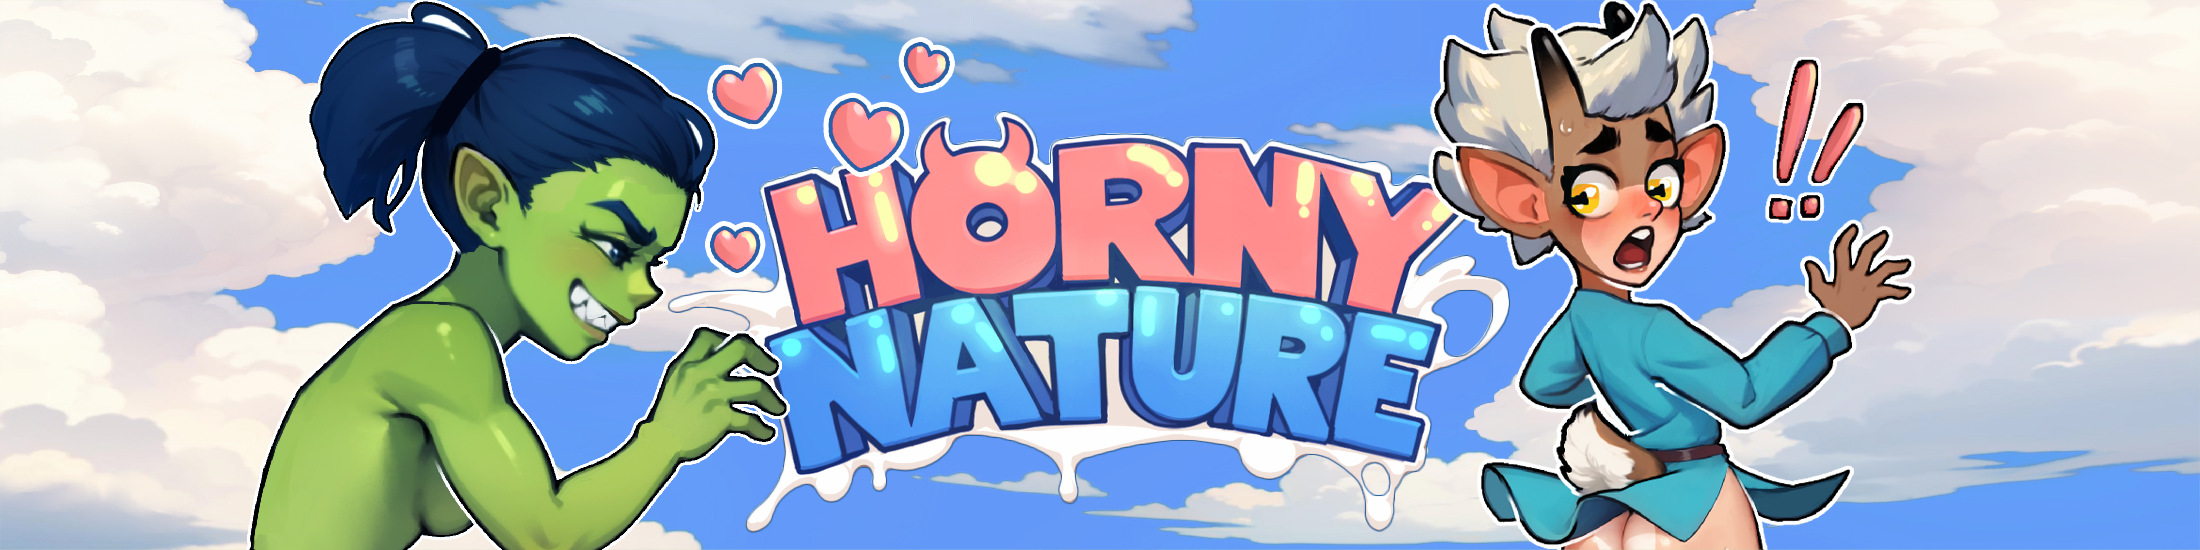 Horny Nature poster